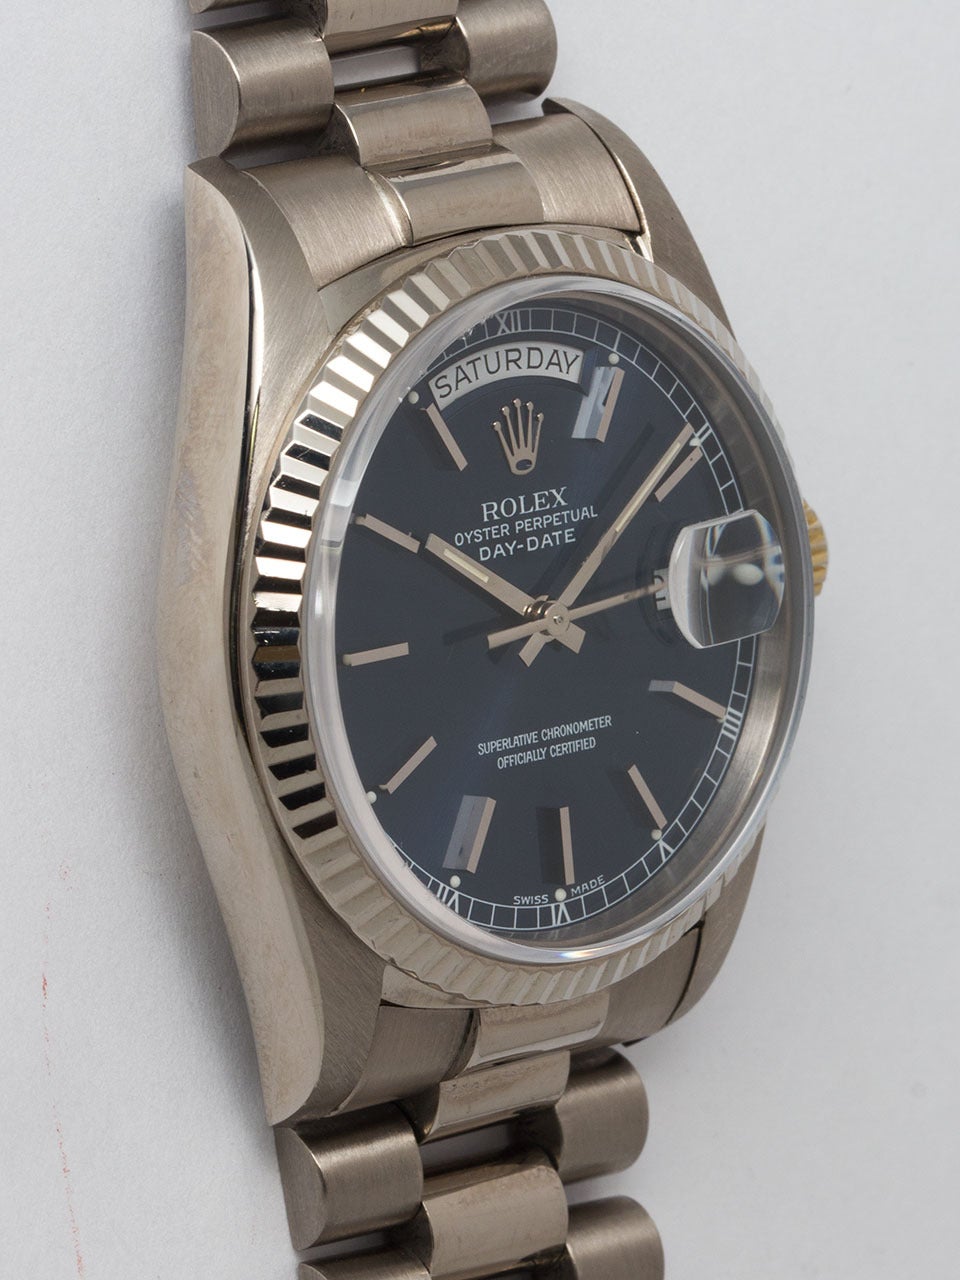 Rolex 18K White Gold Day Date President ref 18039, serial #K circa 1988. 36mm diameter case with fluted bezel and sapphire crystal. Very pleasing original sapphire blue dial with applied silver indexes and hands. Powered by calibre 3055 self winding